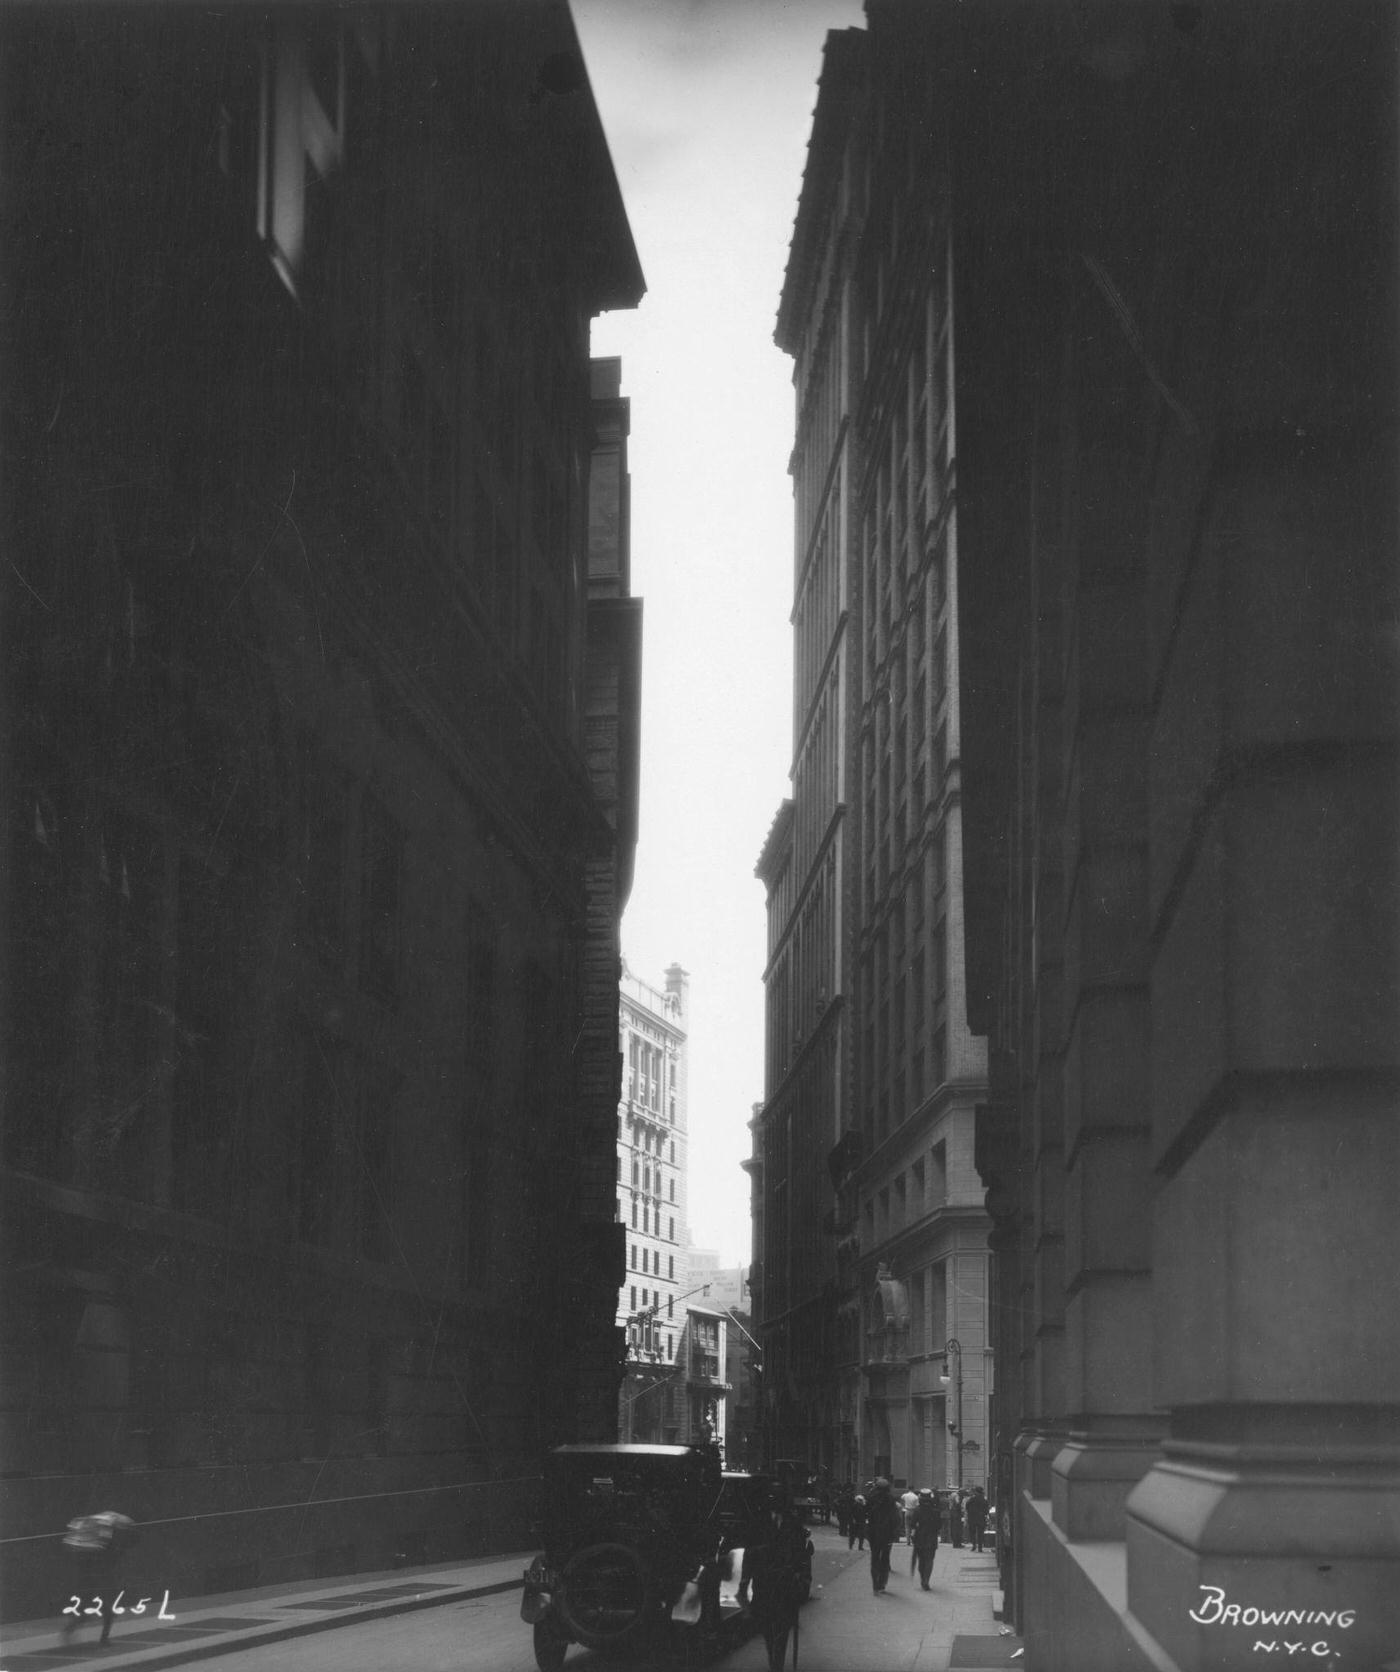 William Street Looking South From Wall Street, Manhattan, 1929